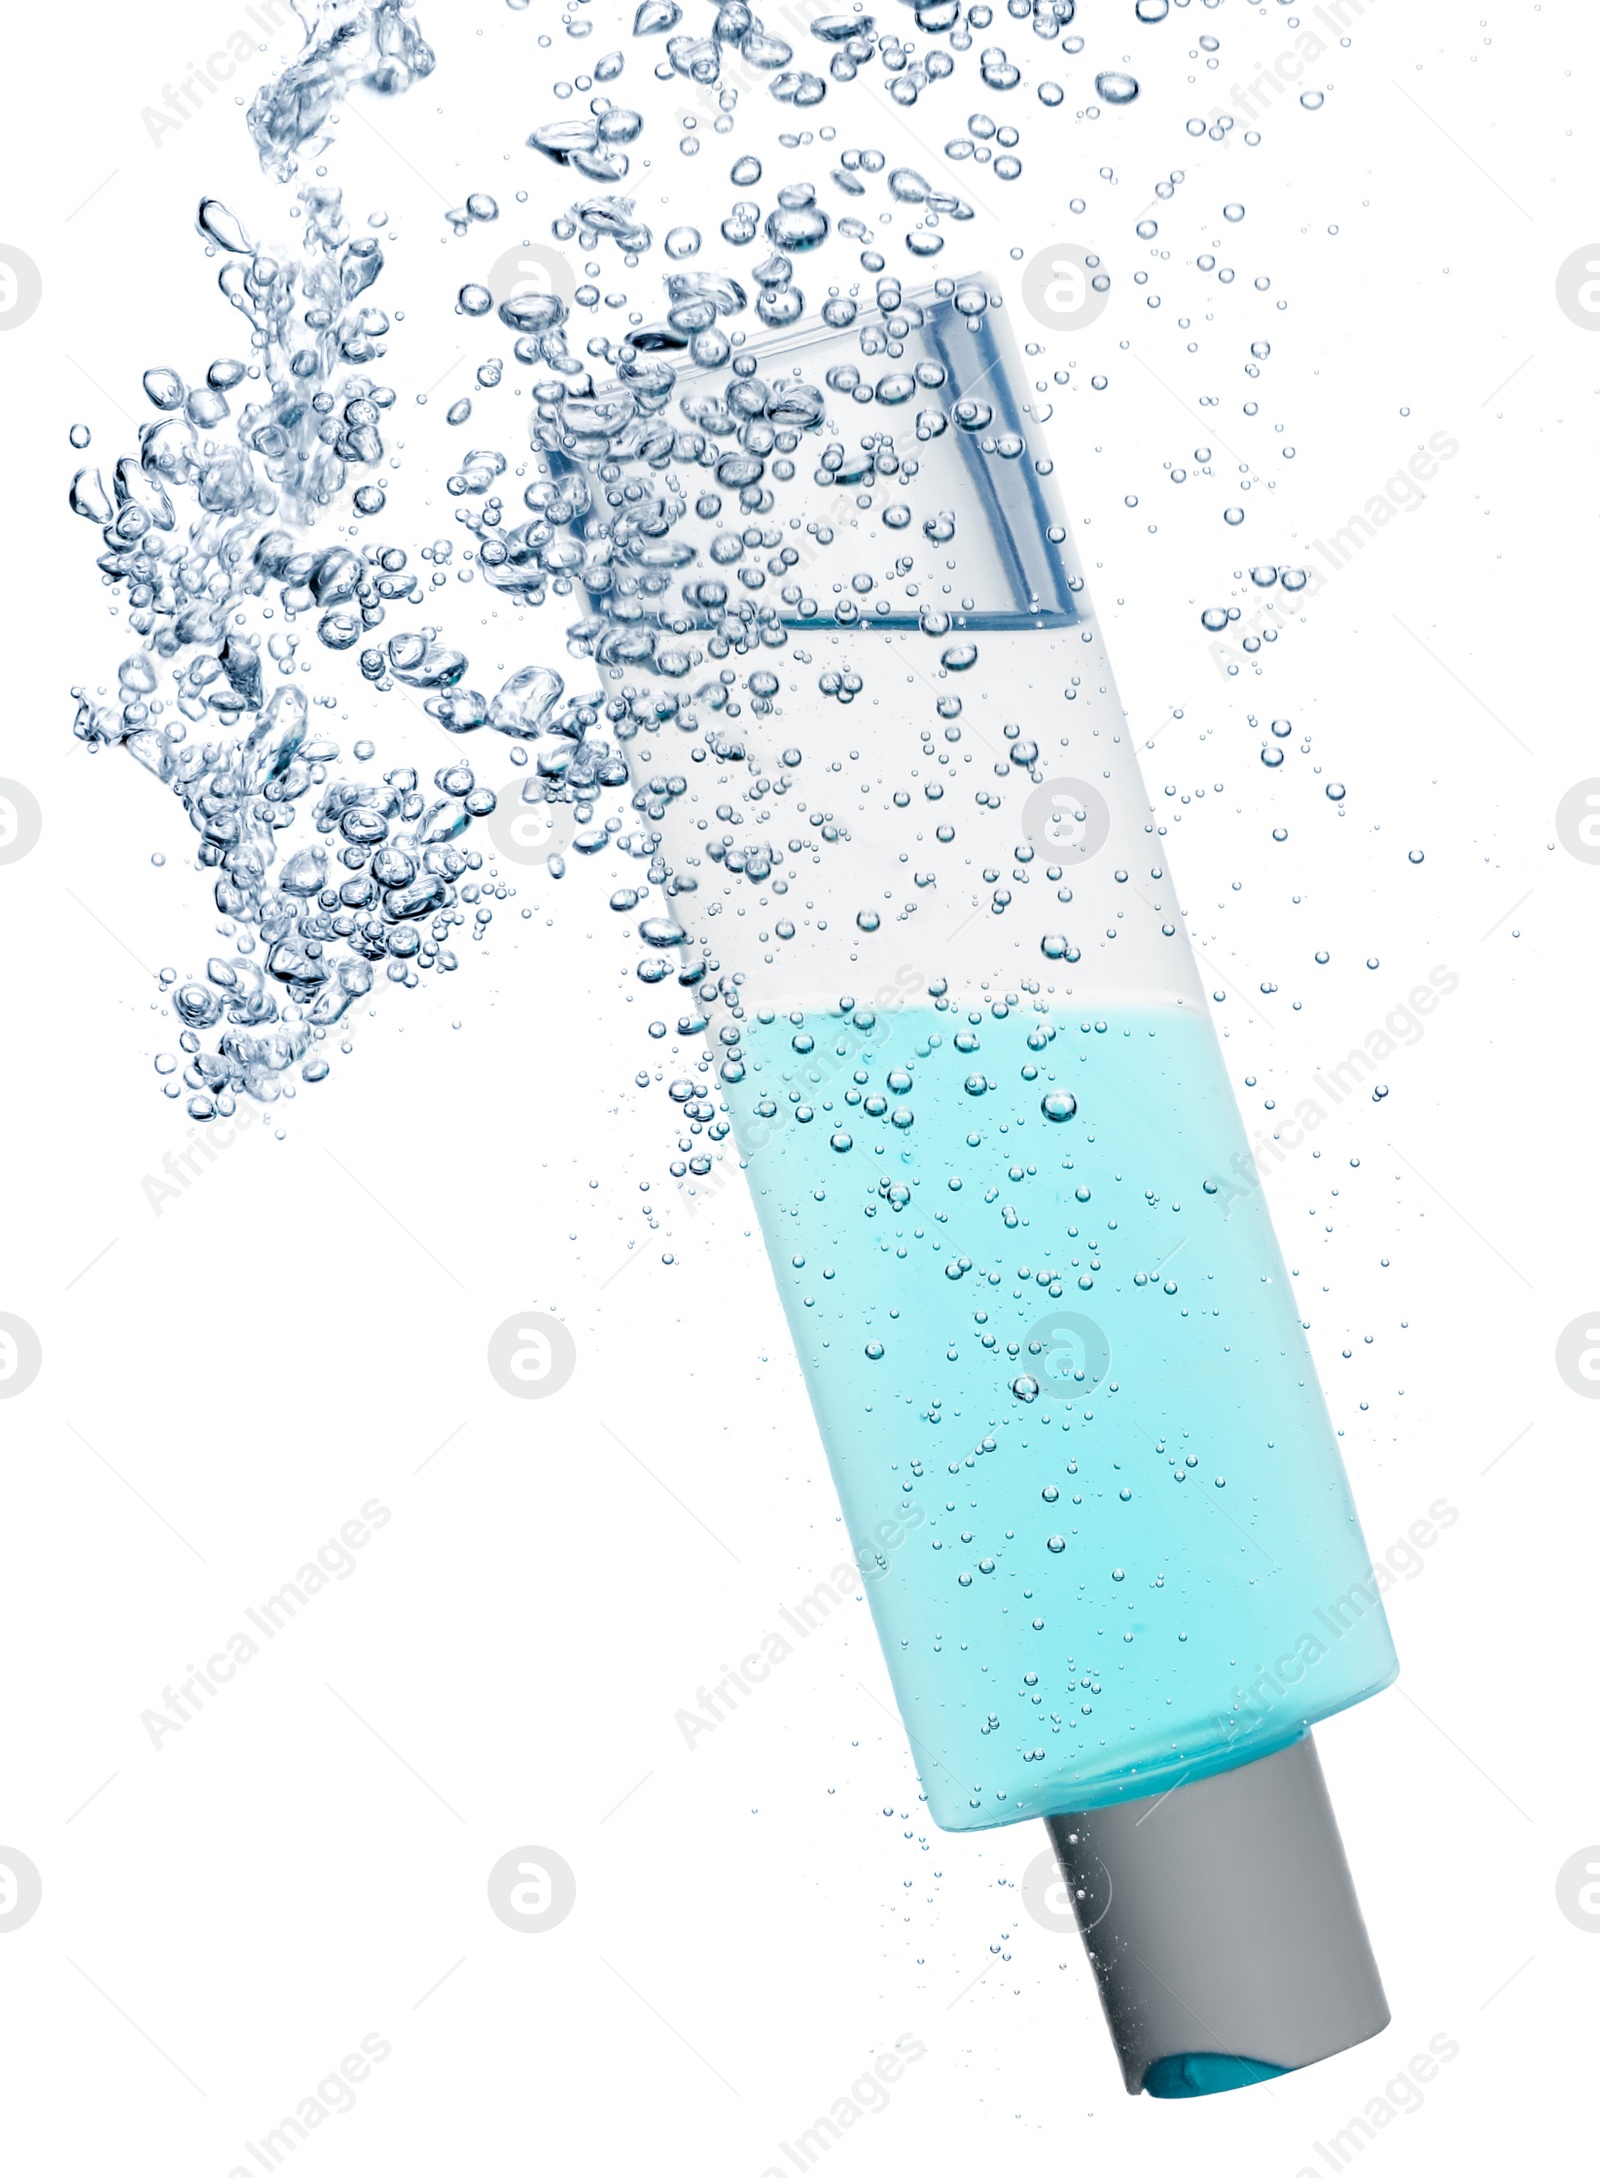 Photo of Bottle of micellar water with bubbles on white background